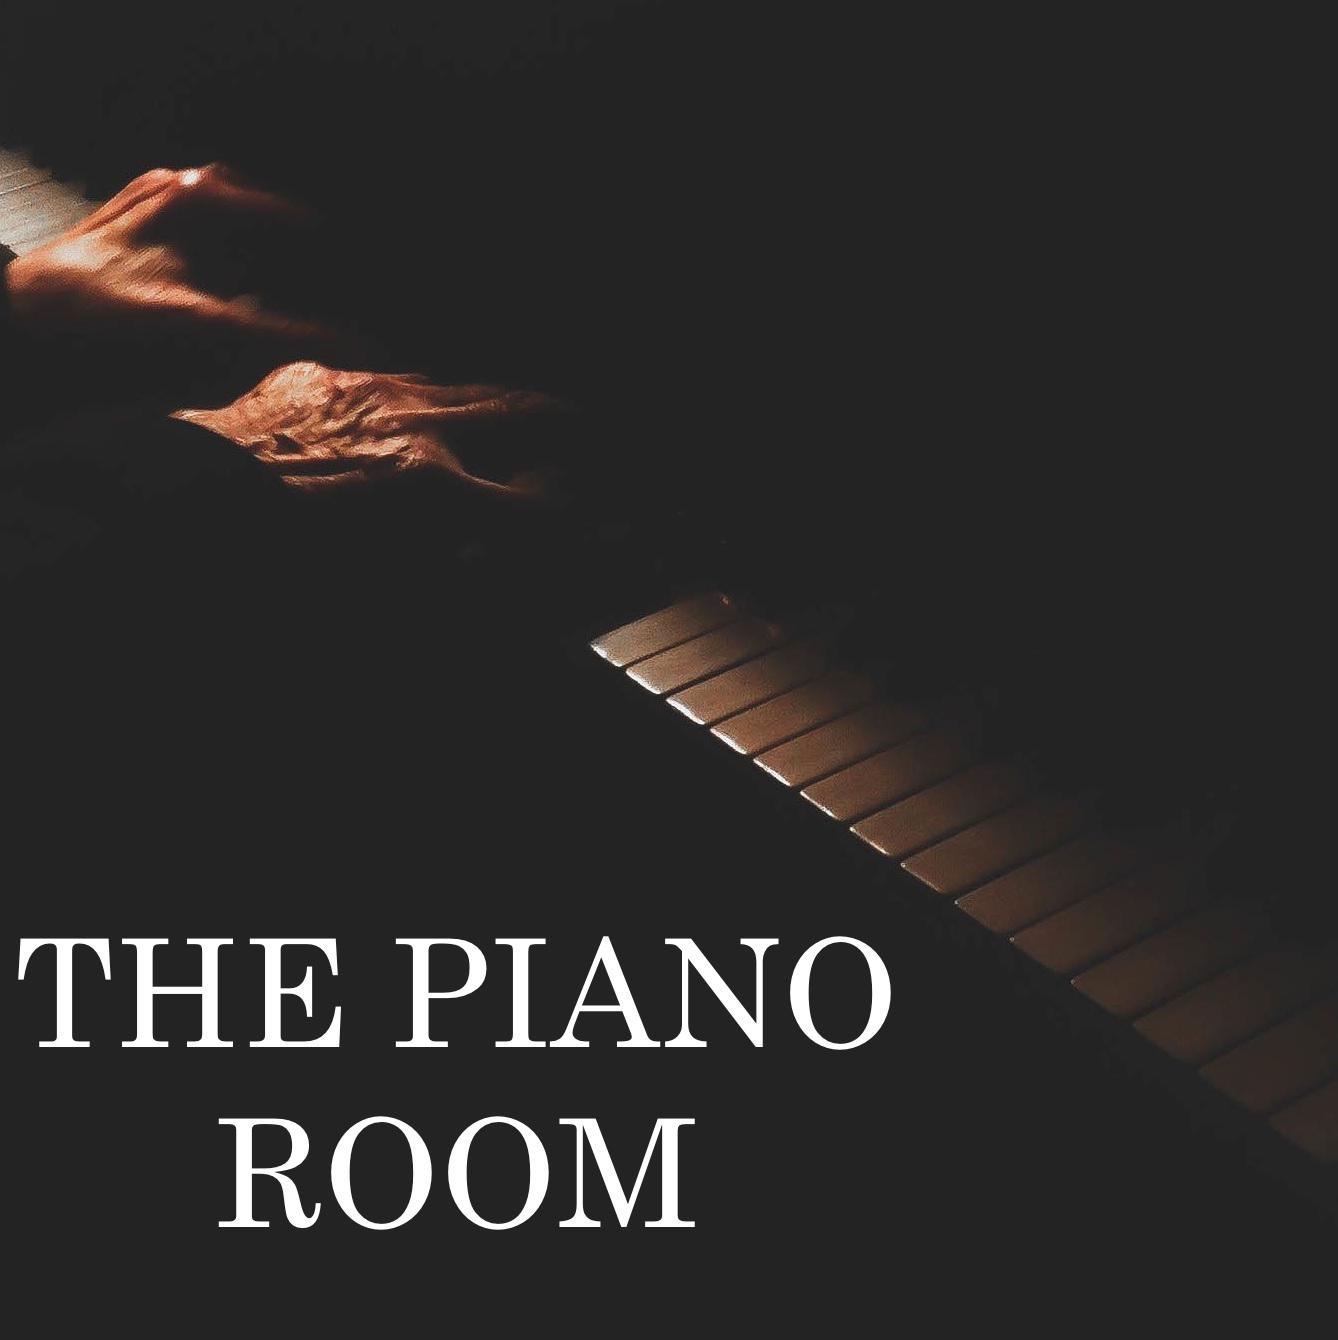 The Piano Room - Piano Pieces for Relaxing, Background Music, Piano Melodies to Help Calm the Mind Down, Stress Removal and Relaxation Time